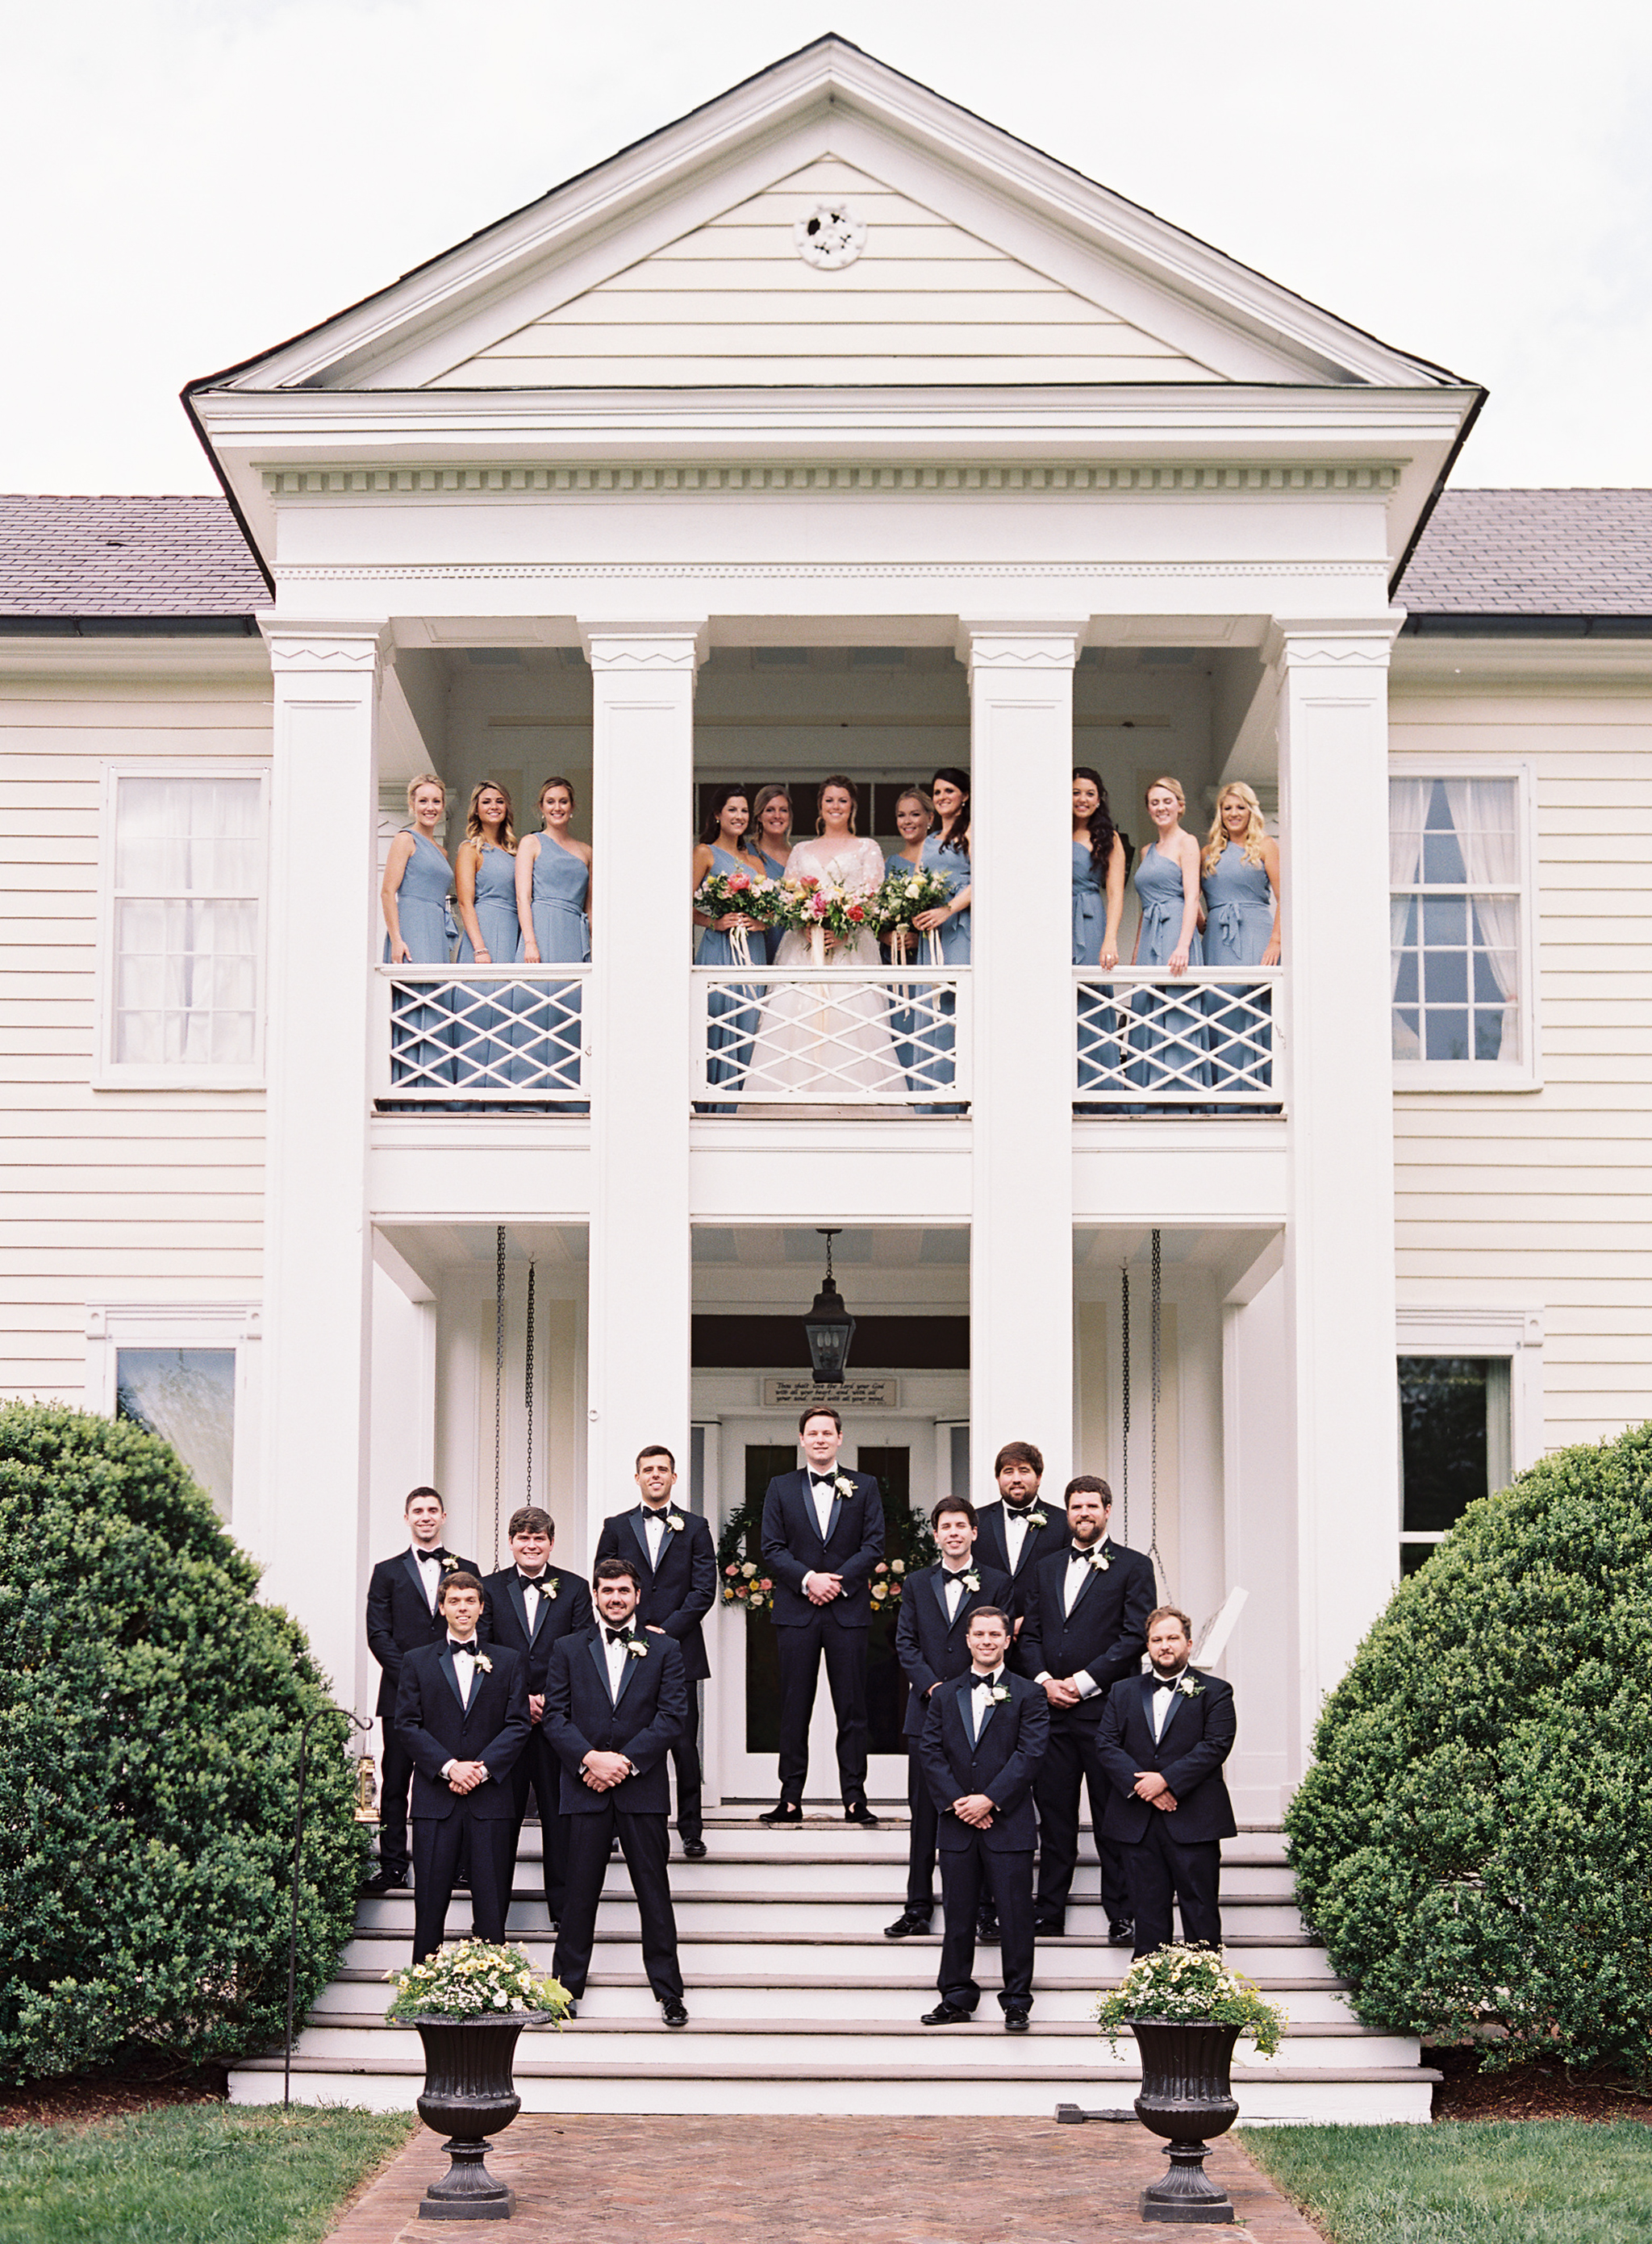 Bridal Party Portraits at the bride's childhood home in Franklin, TN